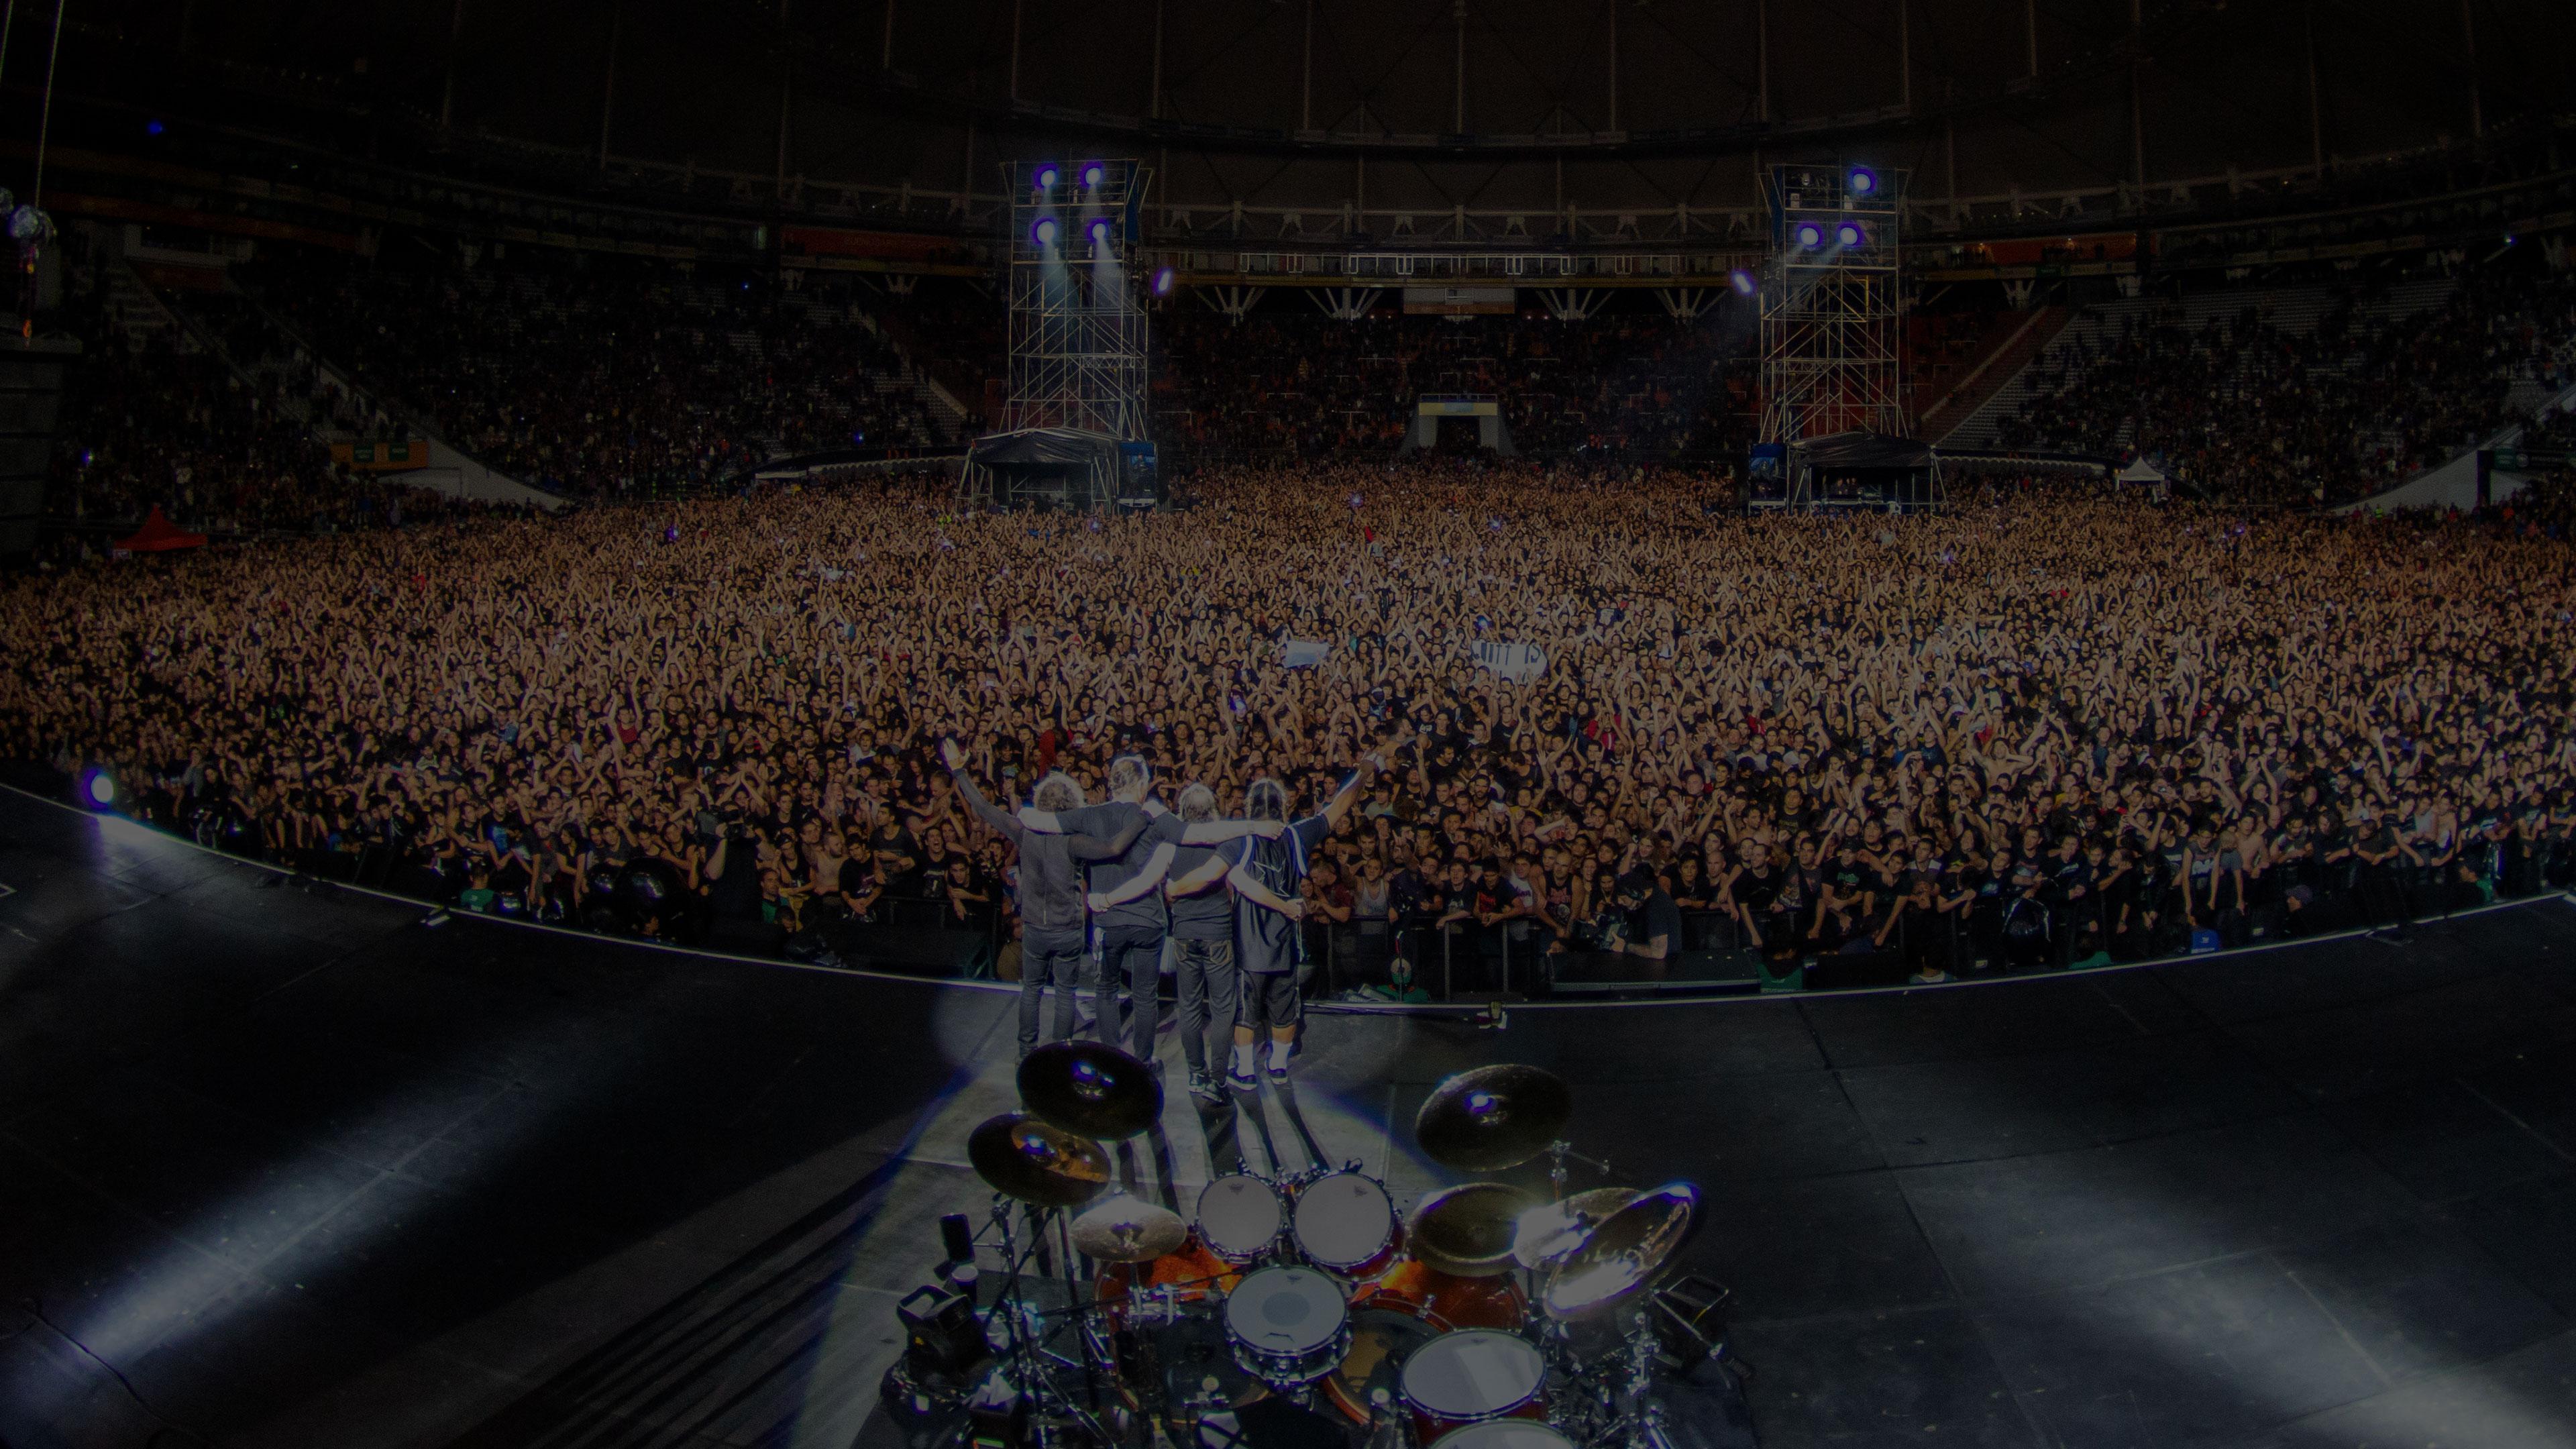 Banner Image for the photo gallery from the gig in Buenos Aires, Argentina shot on March 30, 2014